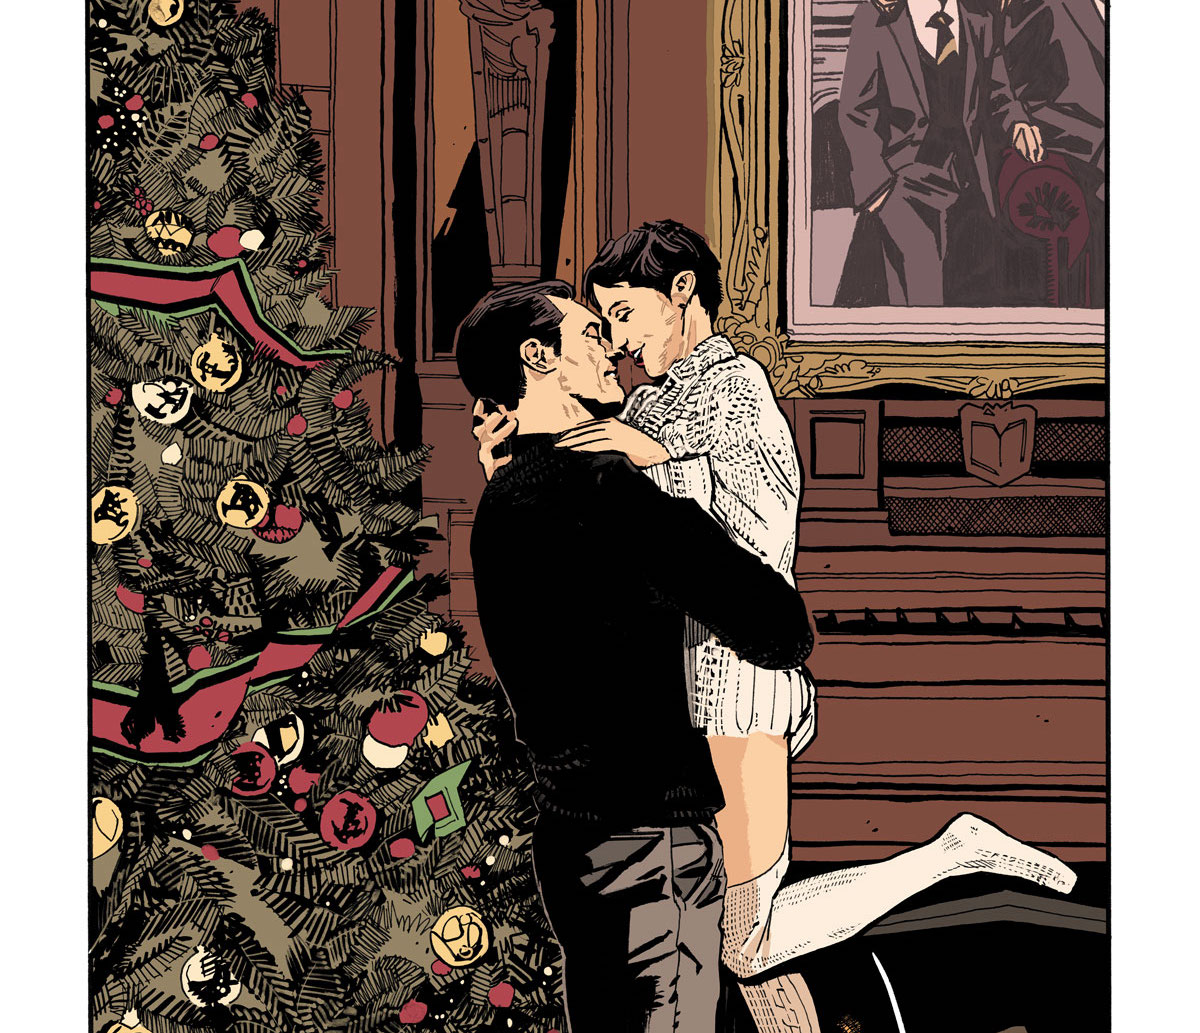 DC First Look: Batman/Catwoman Special #1